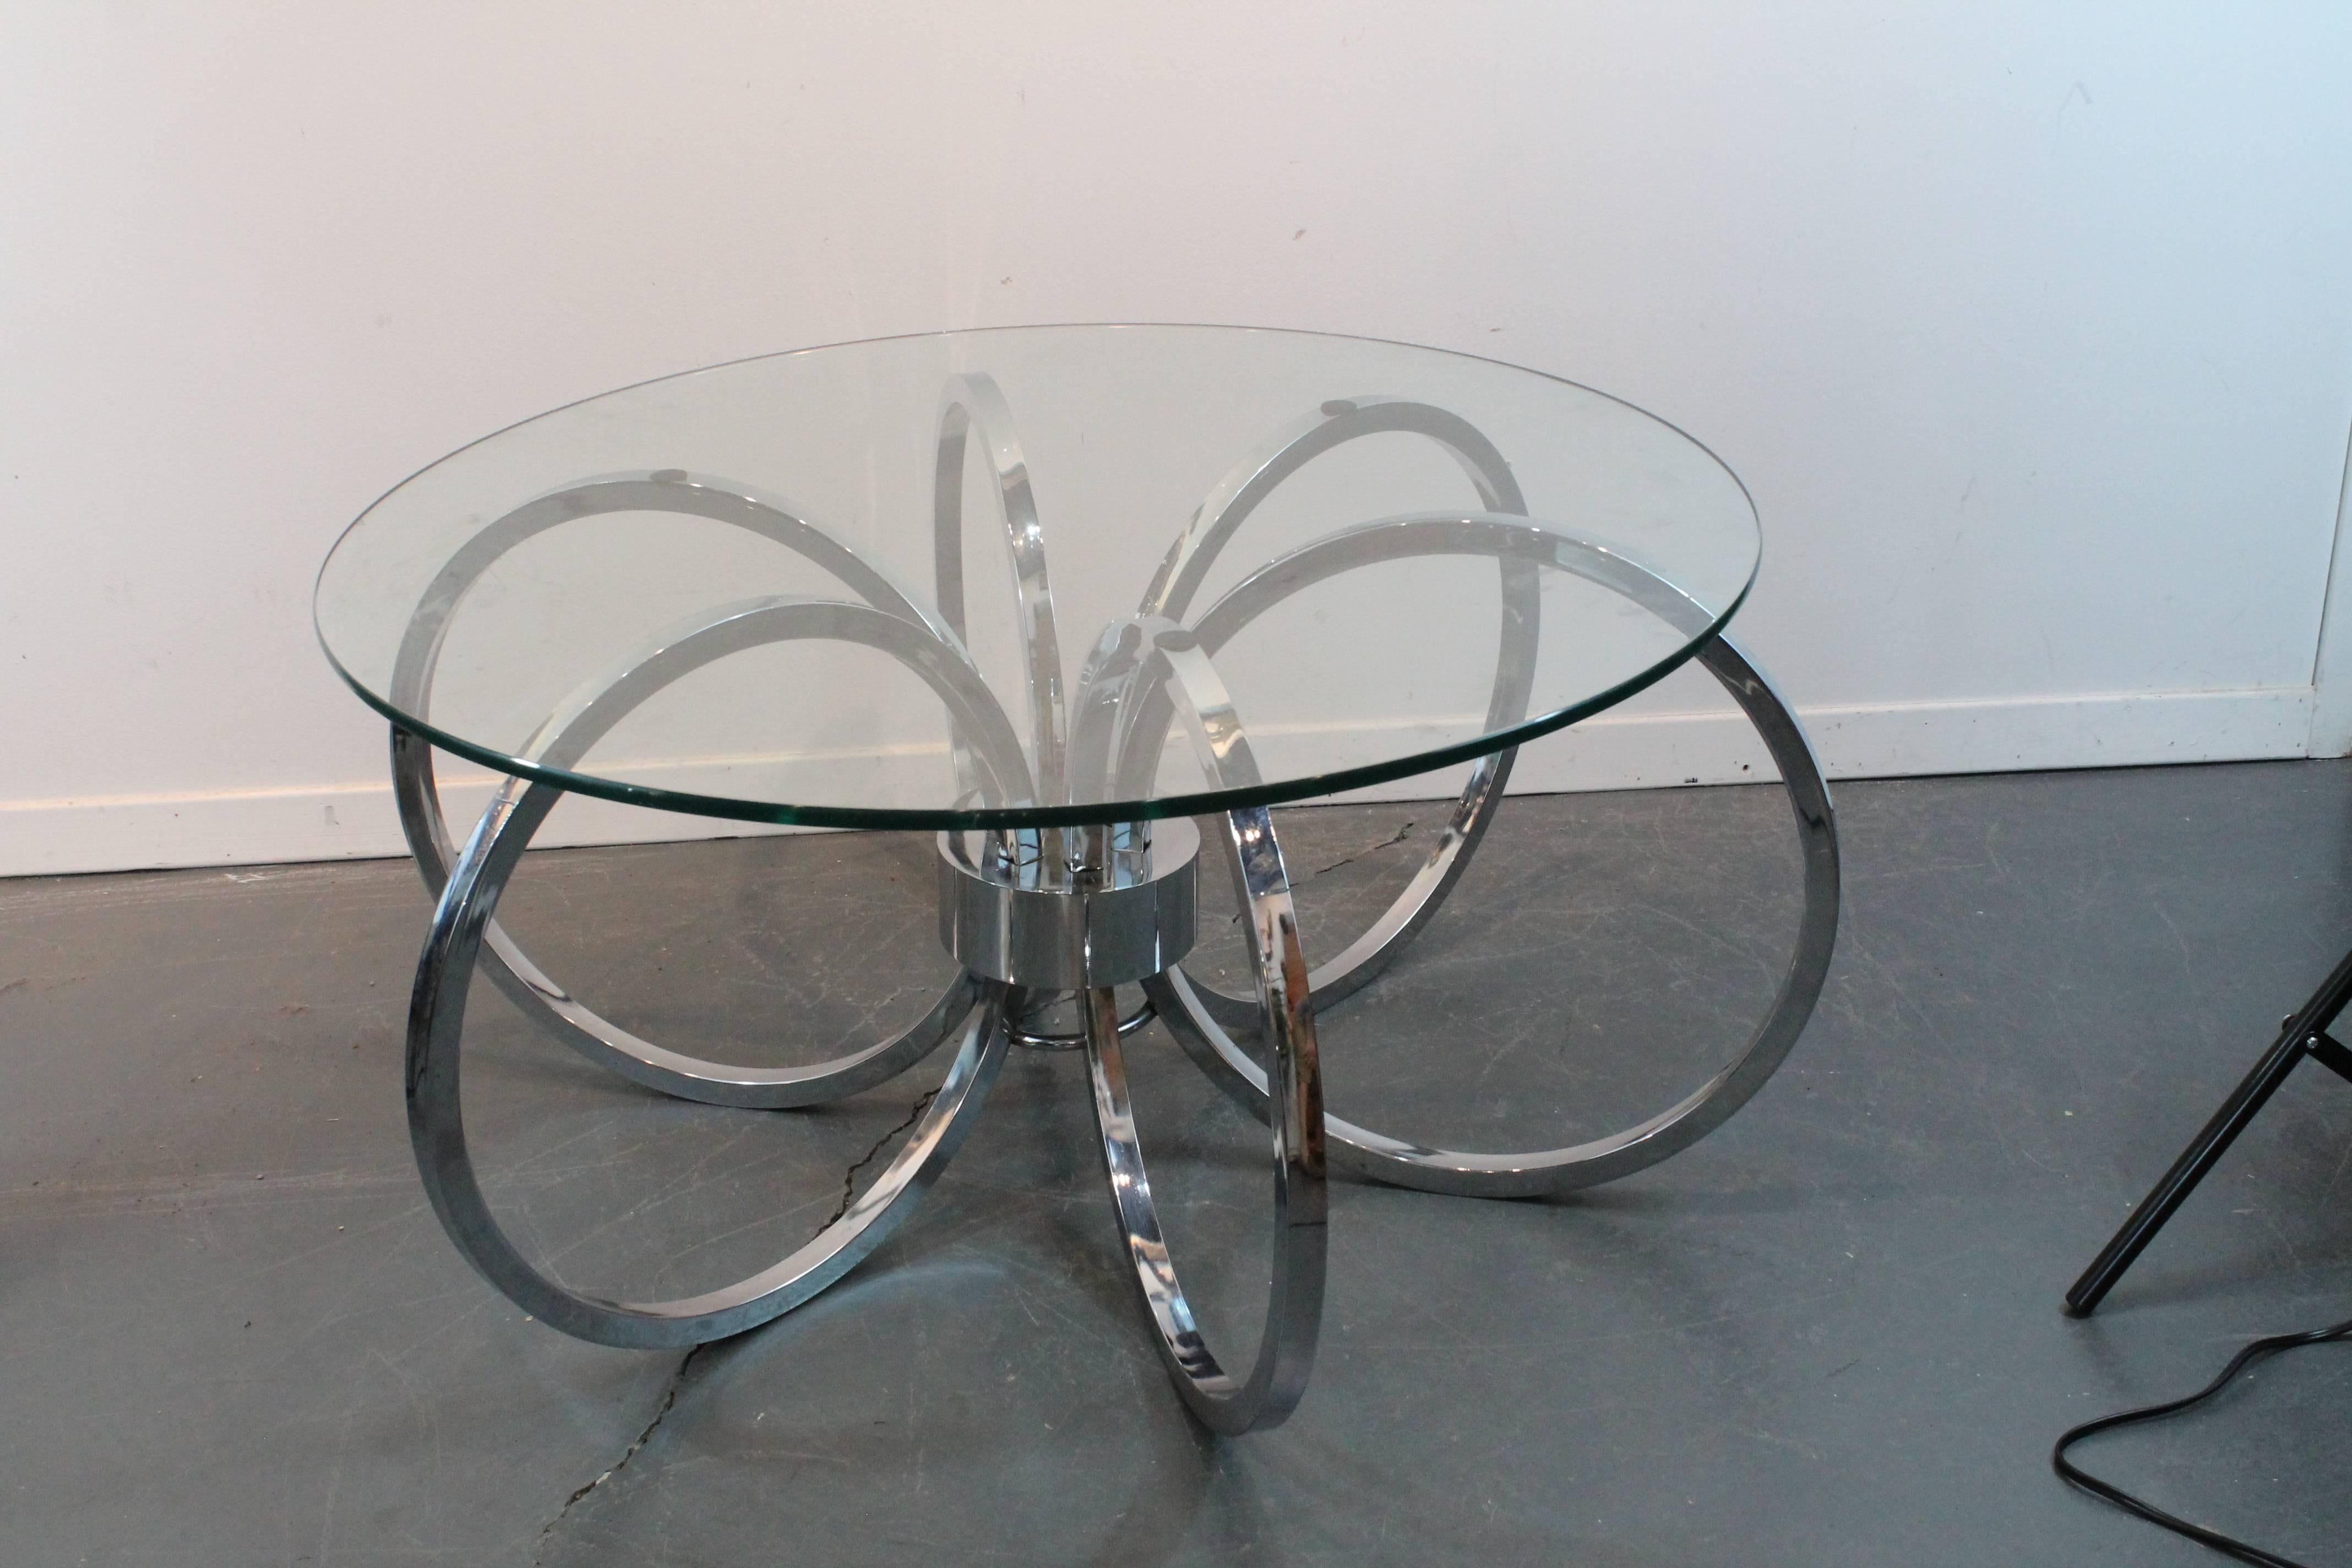 Sculptural chrome cocktail table consisting of six rings with a central chrome axis.
The glass top measures 30